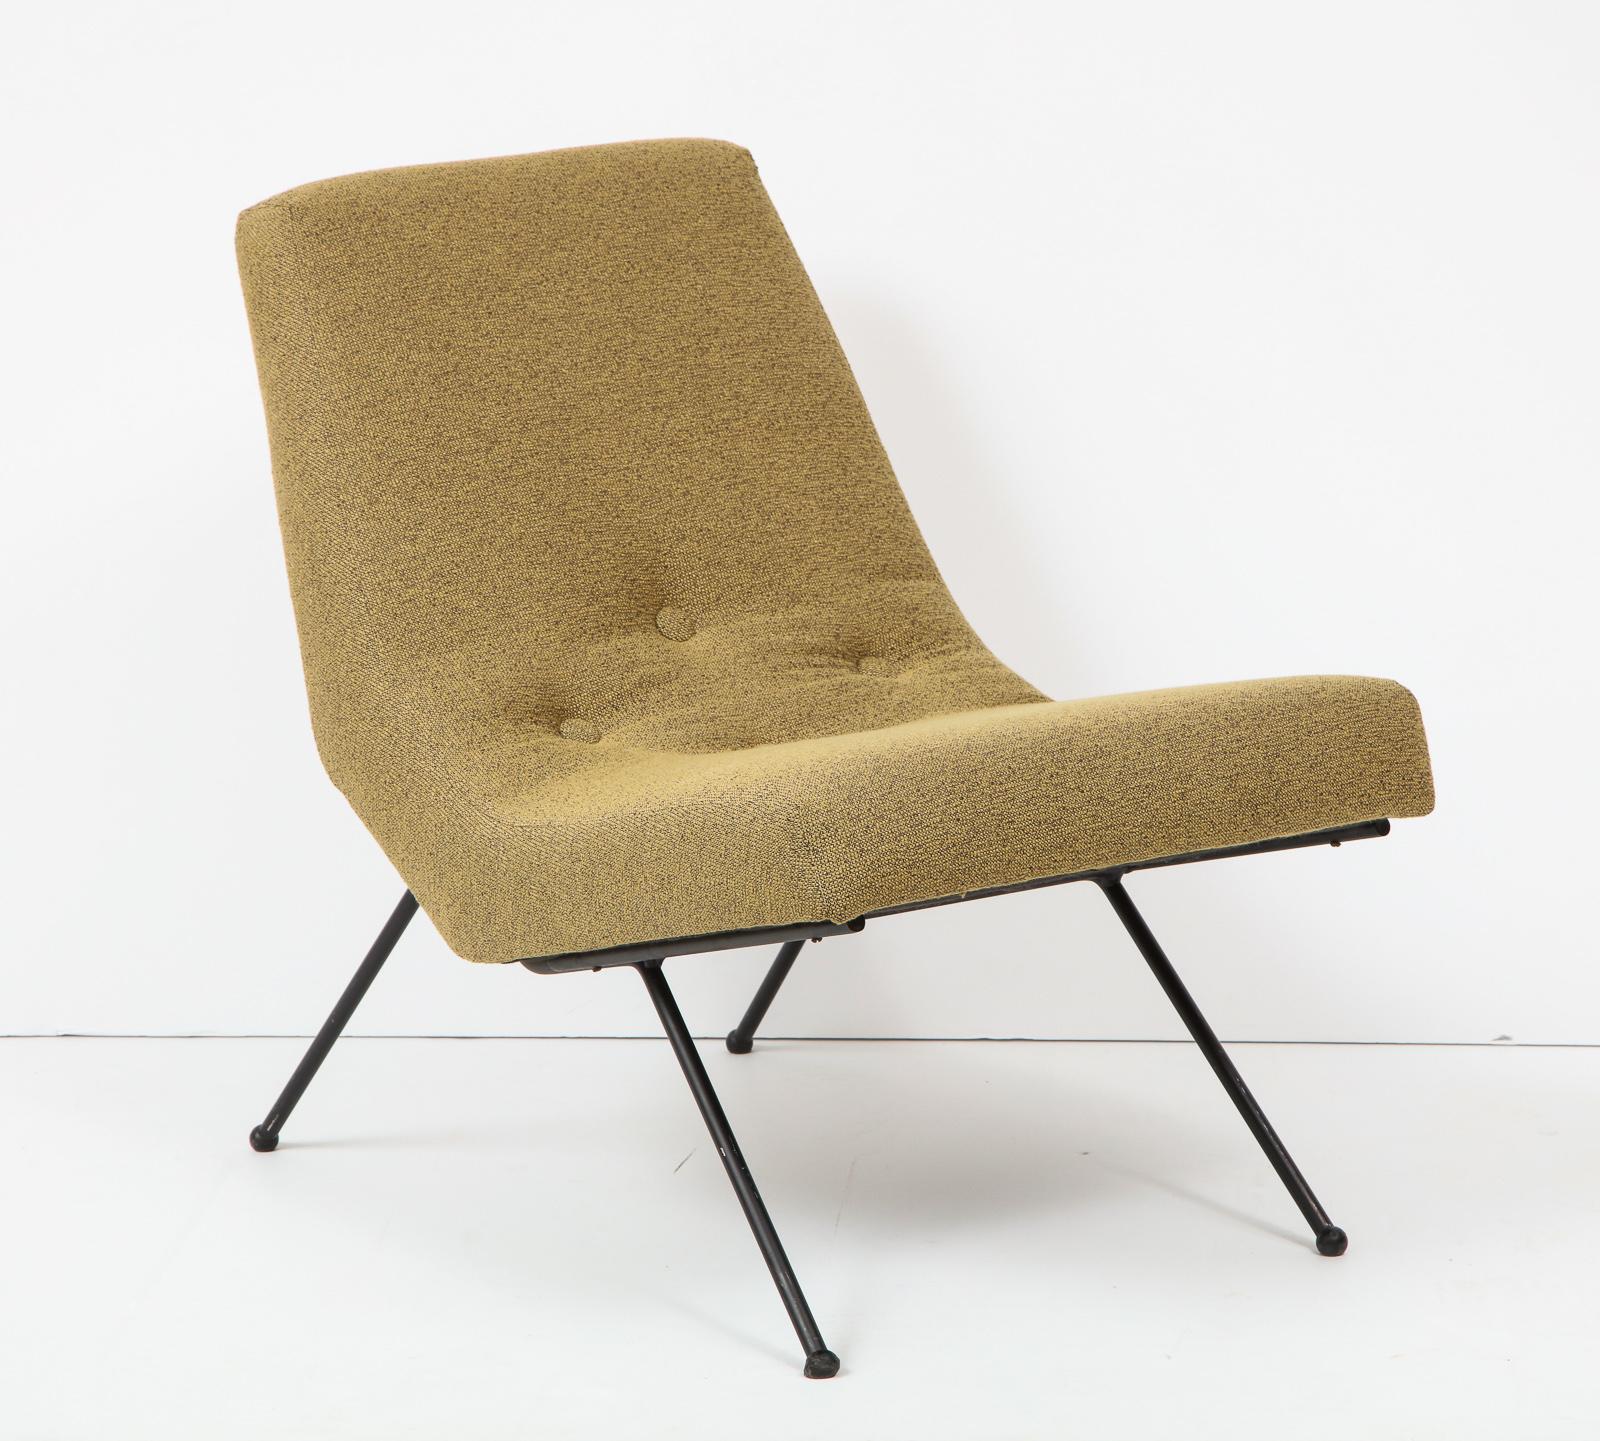 Sculptural lounge chair with a slender, organic seat and splayed enameled steel legs culminating in ball feet. A rare and early offering, circa 1954, by Adrian Pearsall for Craft Associates. Reupholstered, but still with original cloth tag.